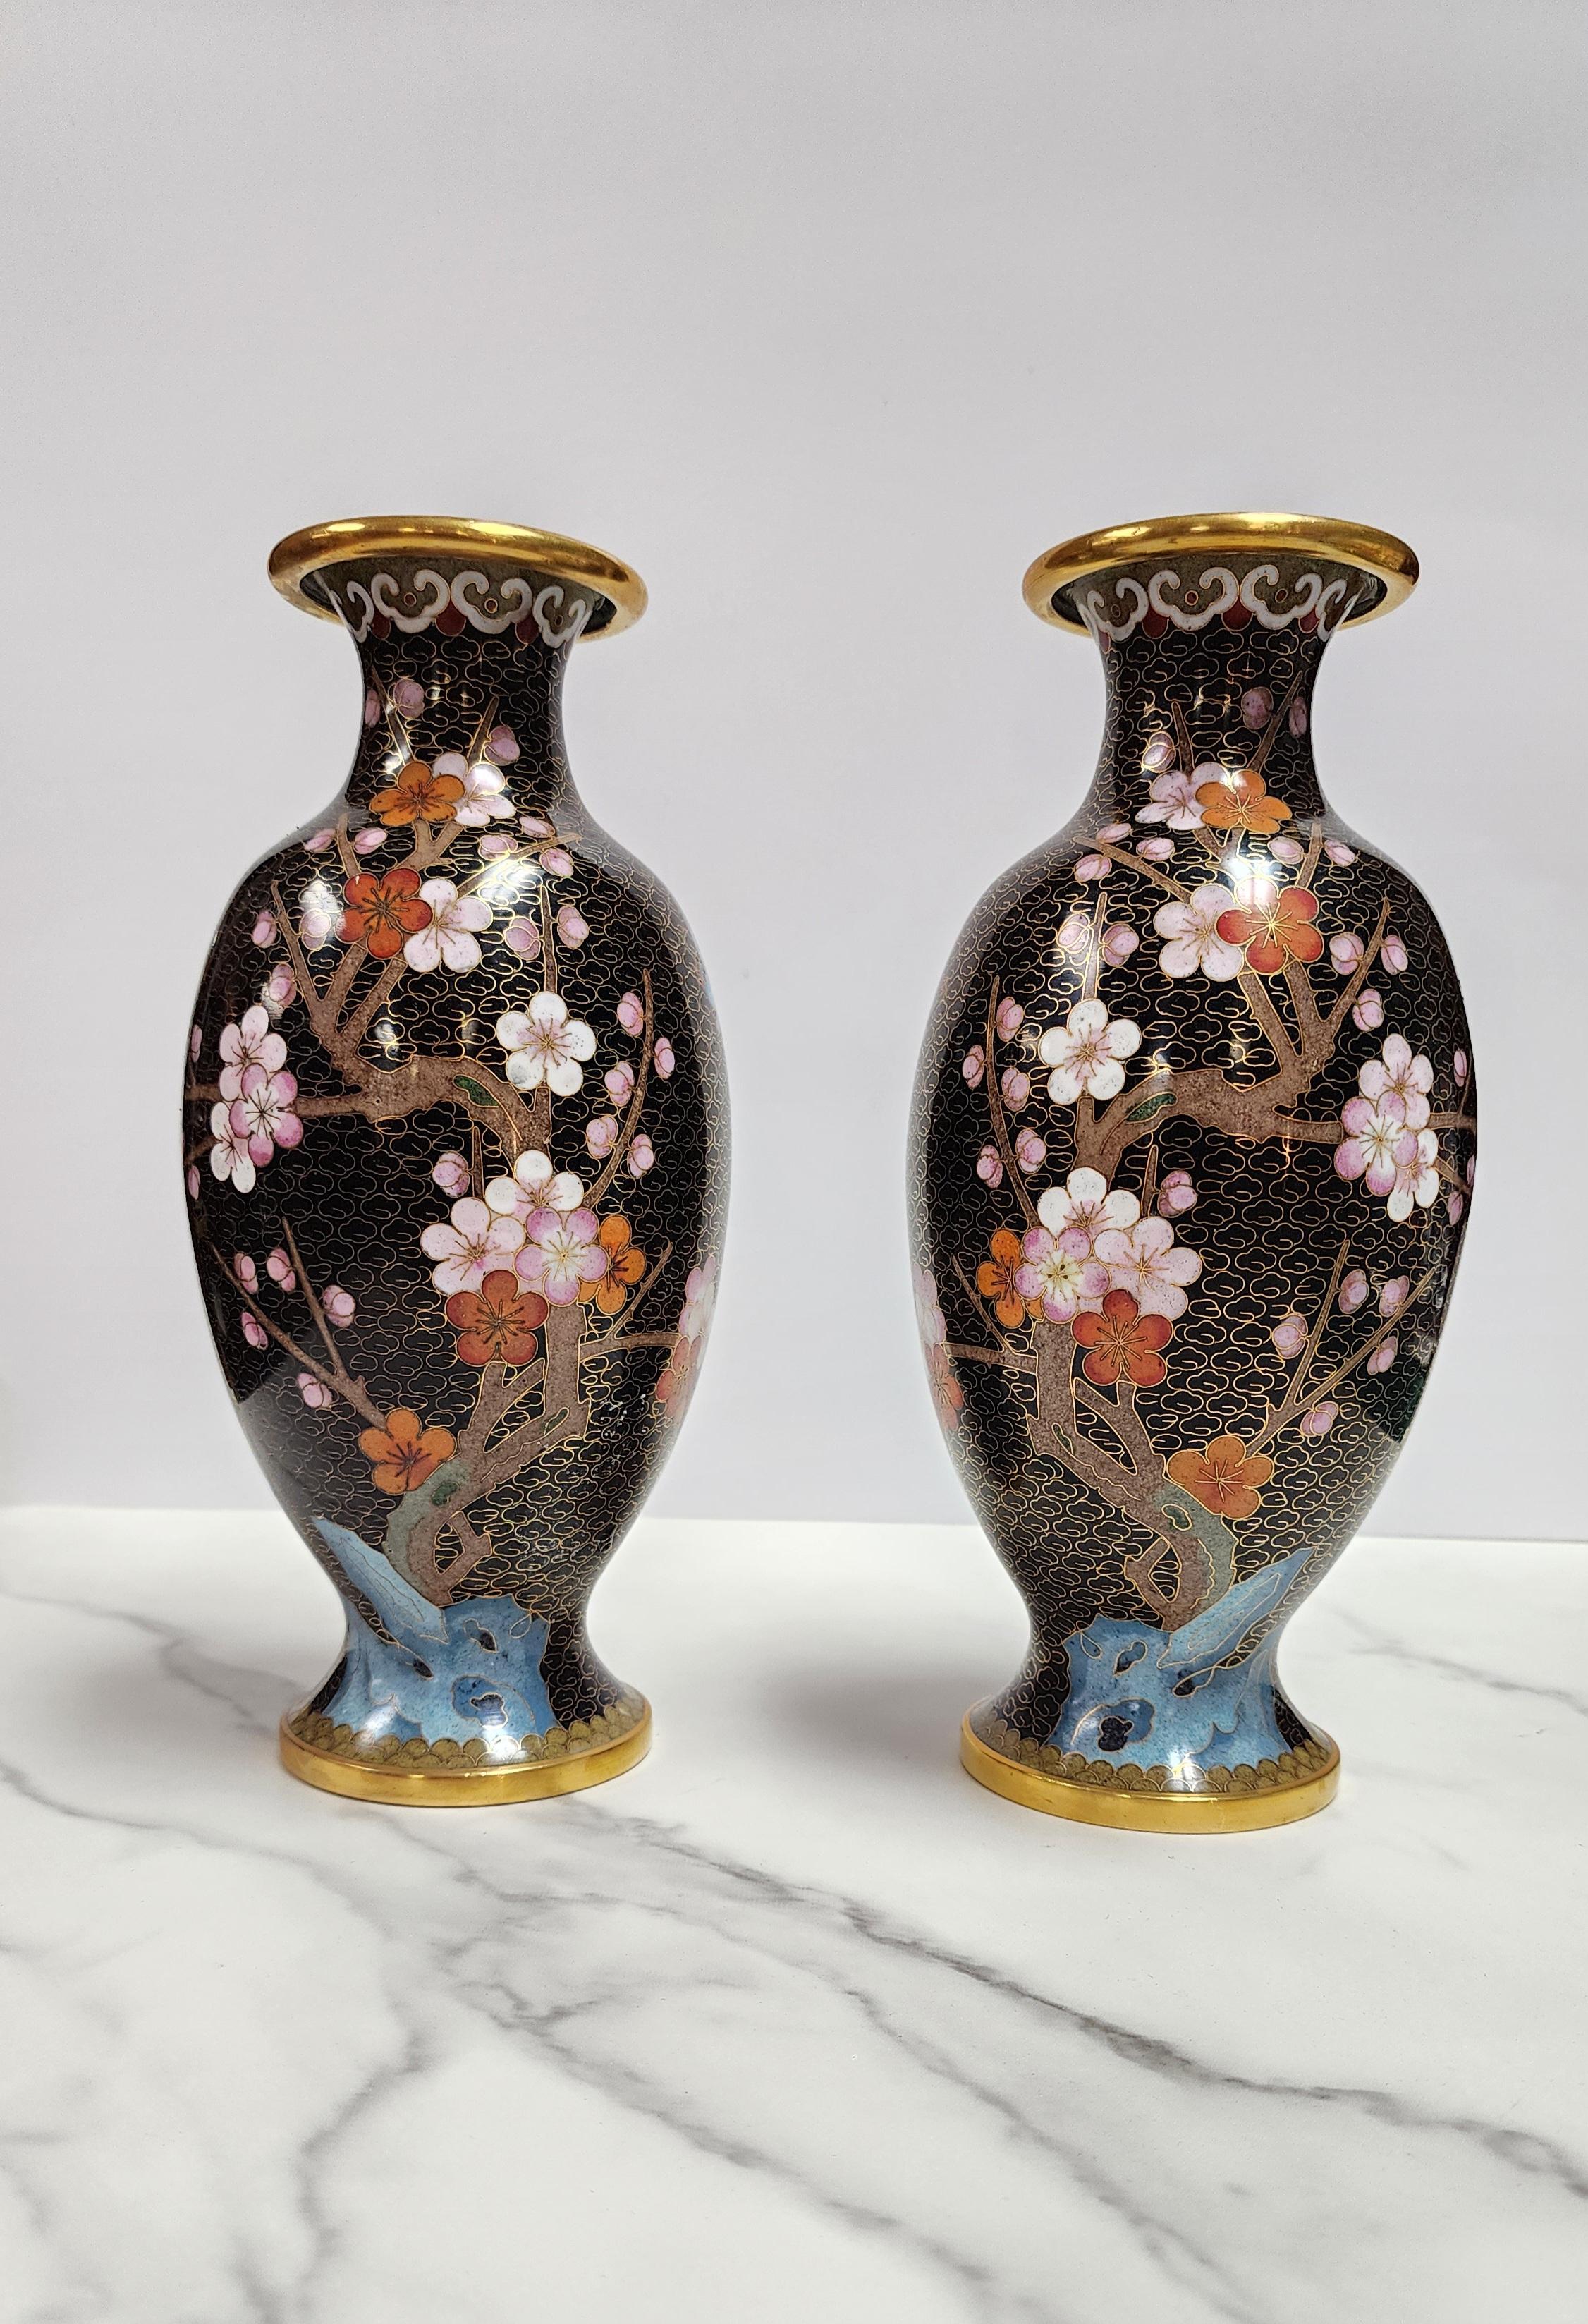 This rare pair of Chinese Cloisonne Enamel vases are unusual in that the design is perfectly mirrored from one vase to the second. The floral and bird motif include cherry blossoms, a white rose and a blue bird. The colors are bright and vibrant and